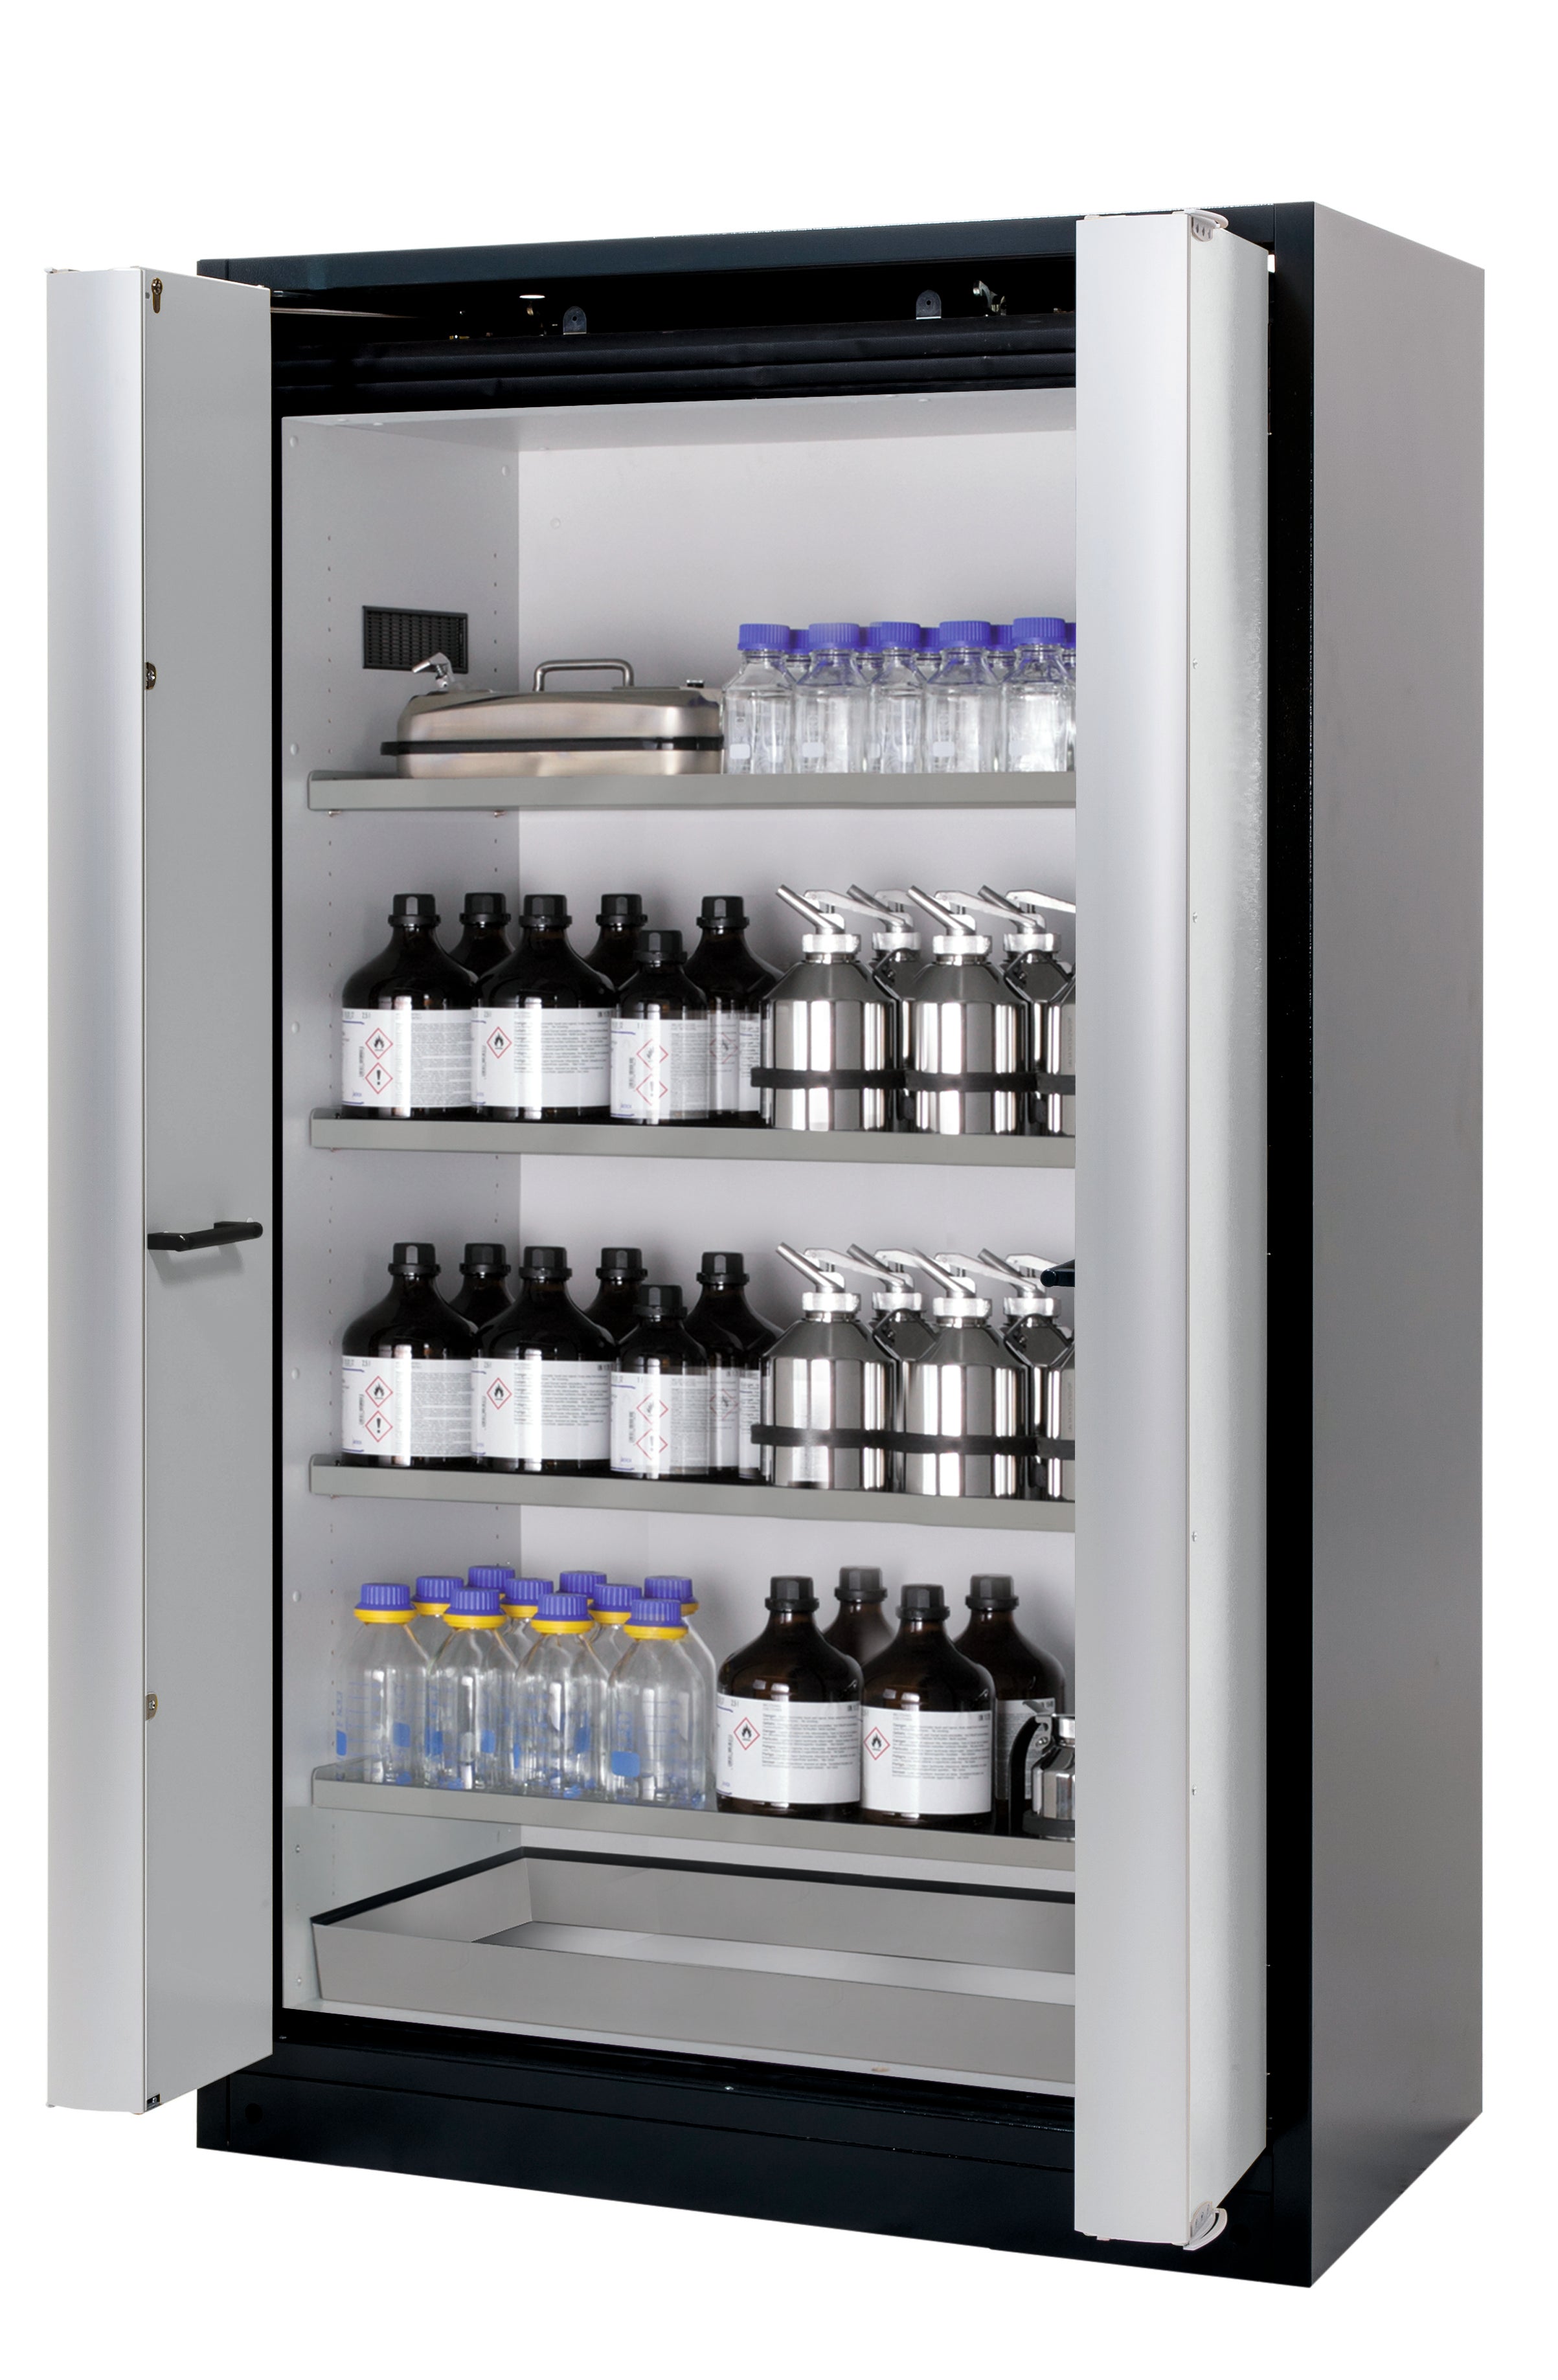 Type 90 safety cabinet Q-PHOENIX-90 model Q90.195.120.FD in light gray RAL 7035 with 4x standard shelves (stainless steel 1.4301)